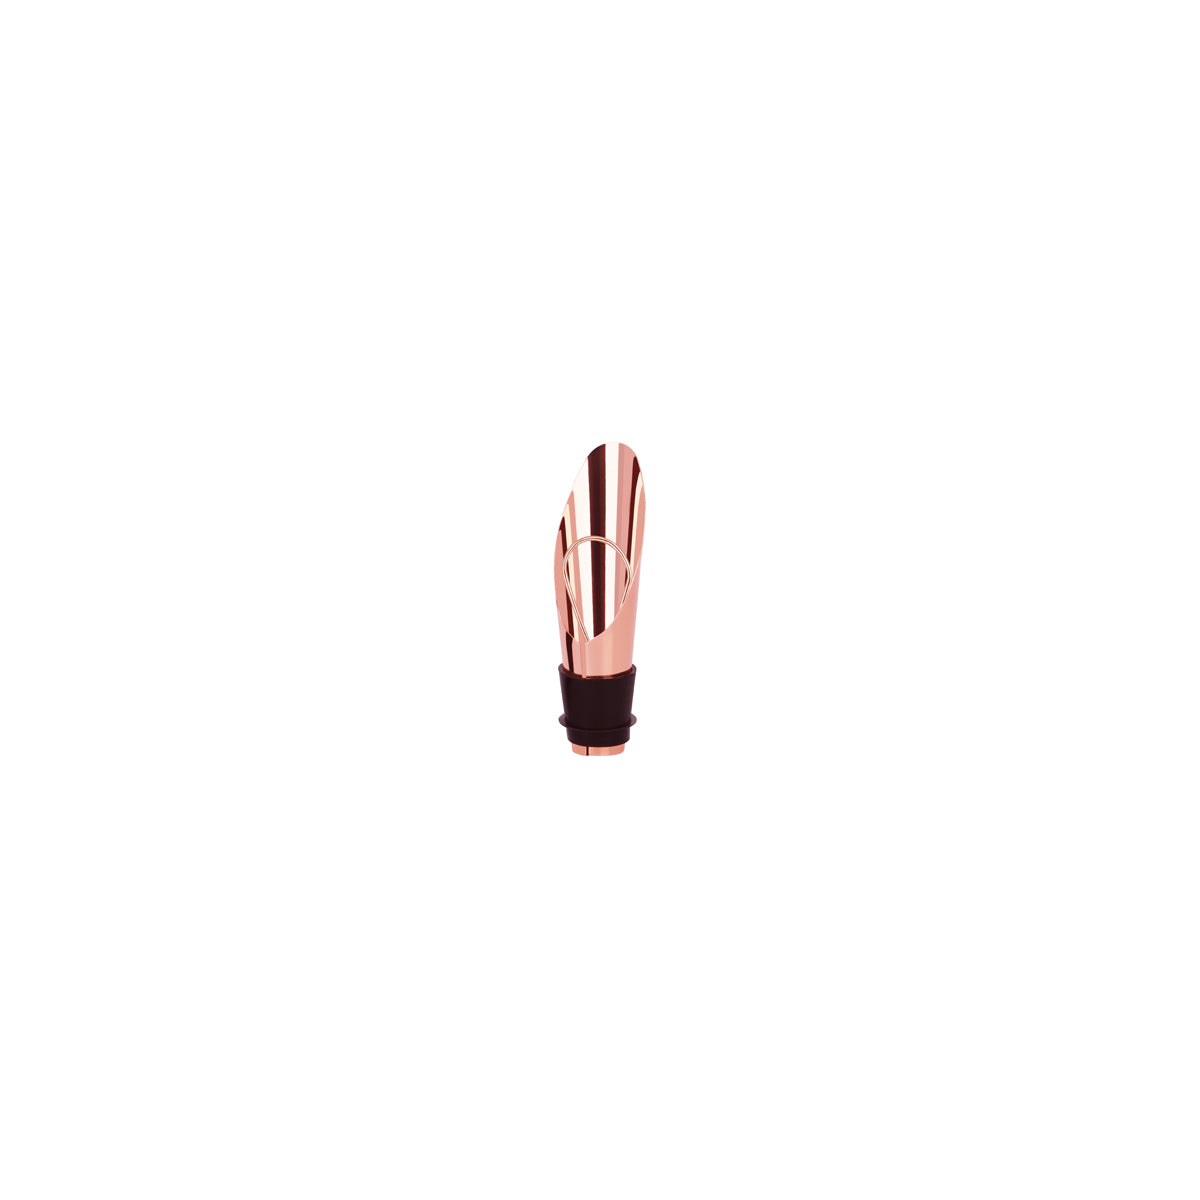 Wine Stopper - W/Pouring Spout, Rose Gold from Zanzi. Packed in a gift box and sold in boxes of 1. Hospitality quality at wholesale price with The Flying Fork! 